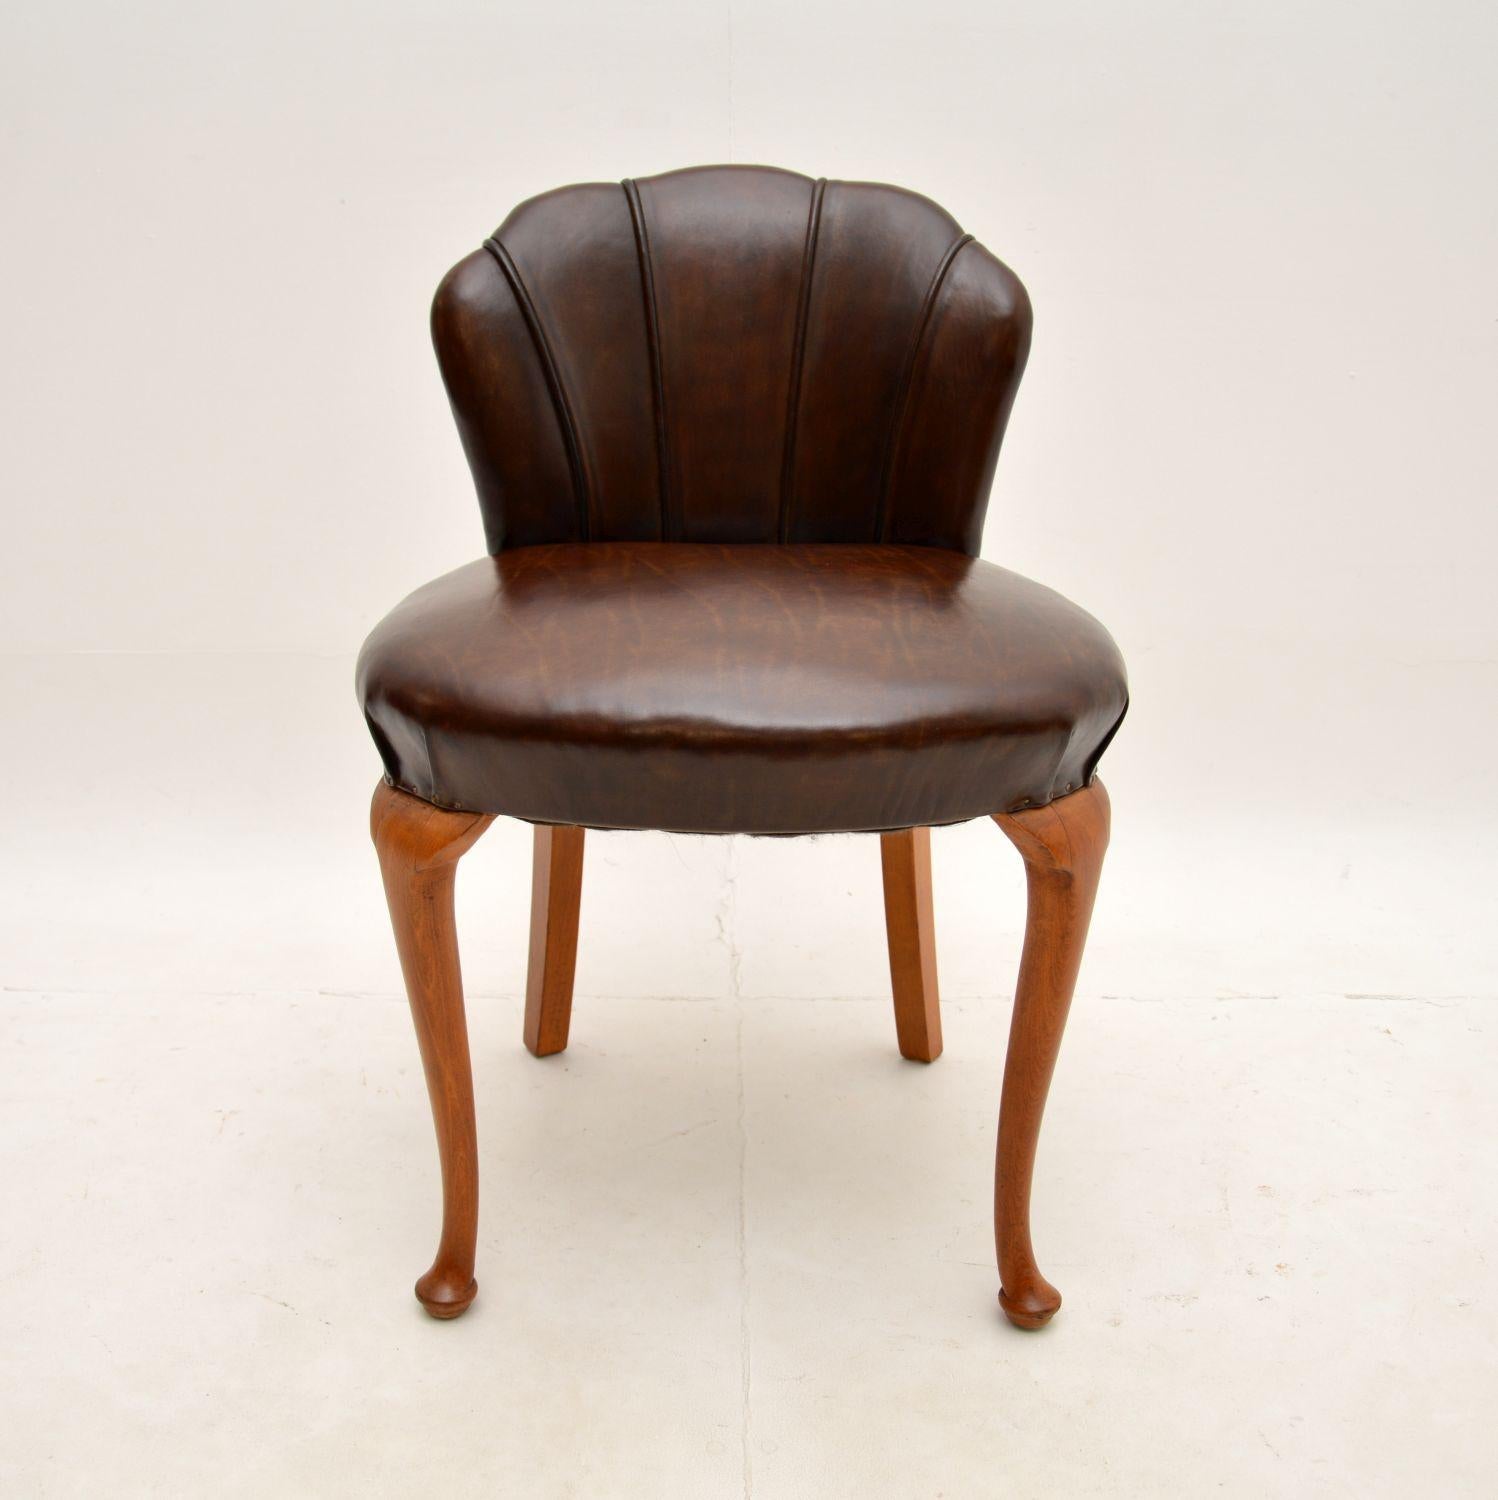 A beautiful Art Deco leather scallop back stool, made in England and dating from the 1920-30’s.

This is of superb quality, it is sturdy, well sprung in the seat, it is very comfortable and supportive. It is a perfect size to be used for a dressing